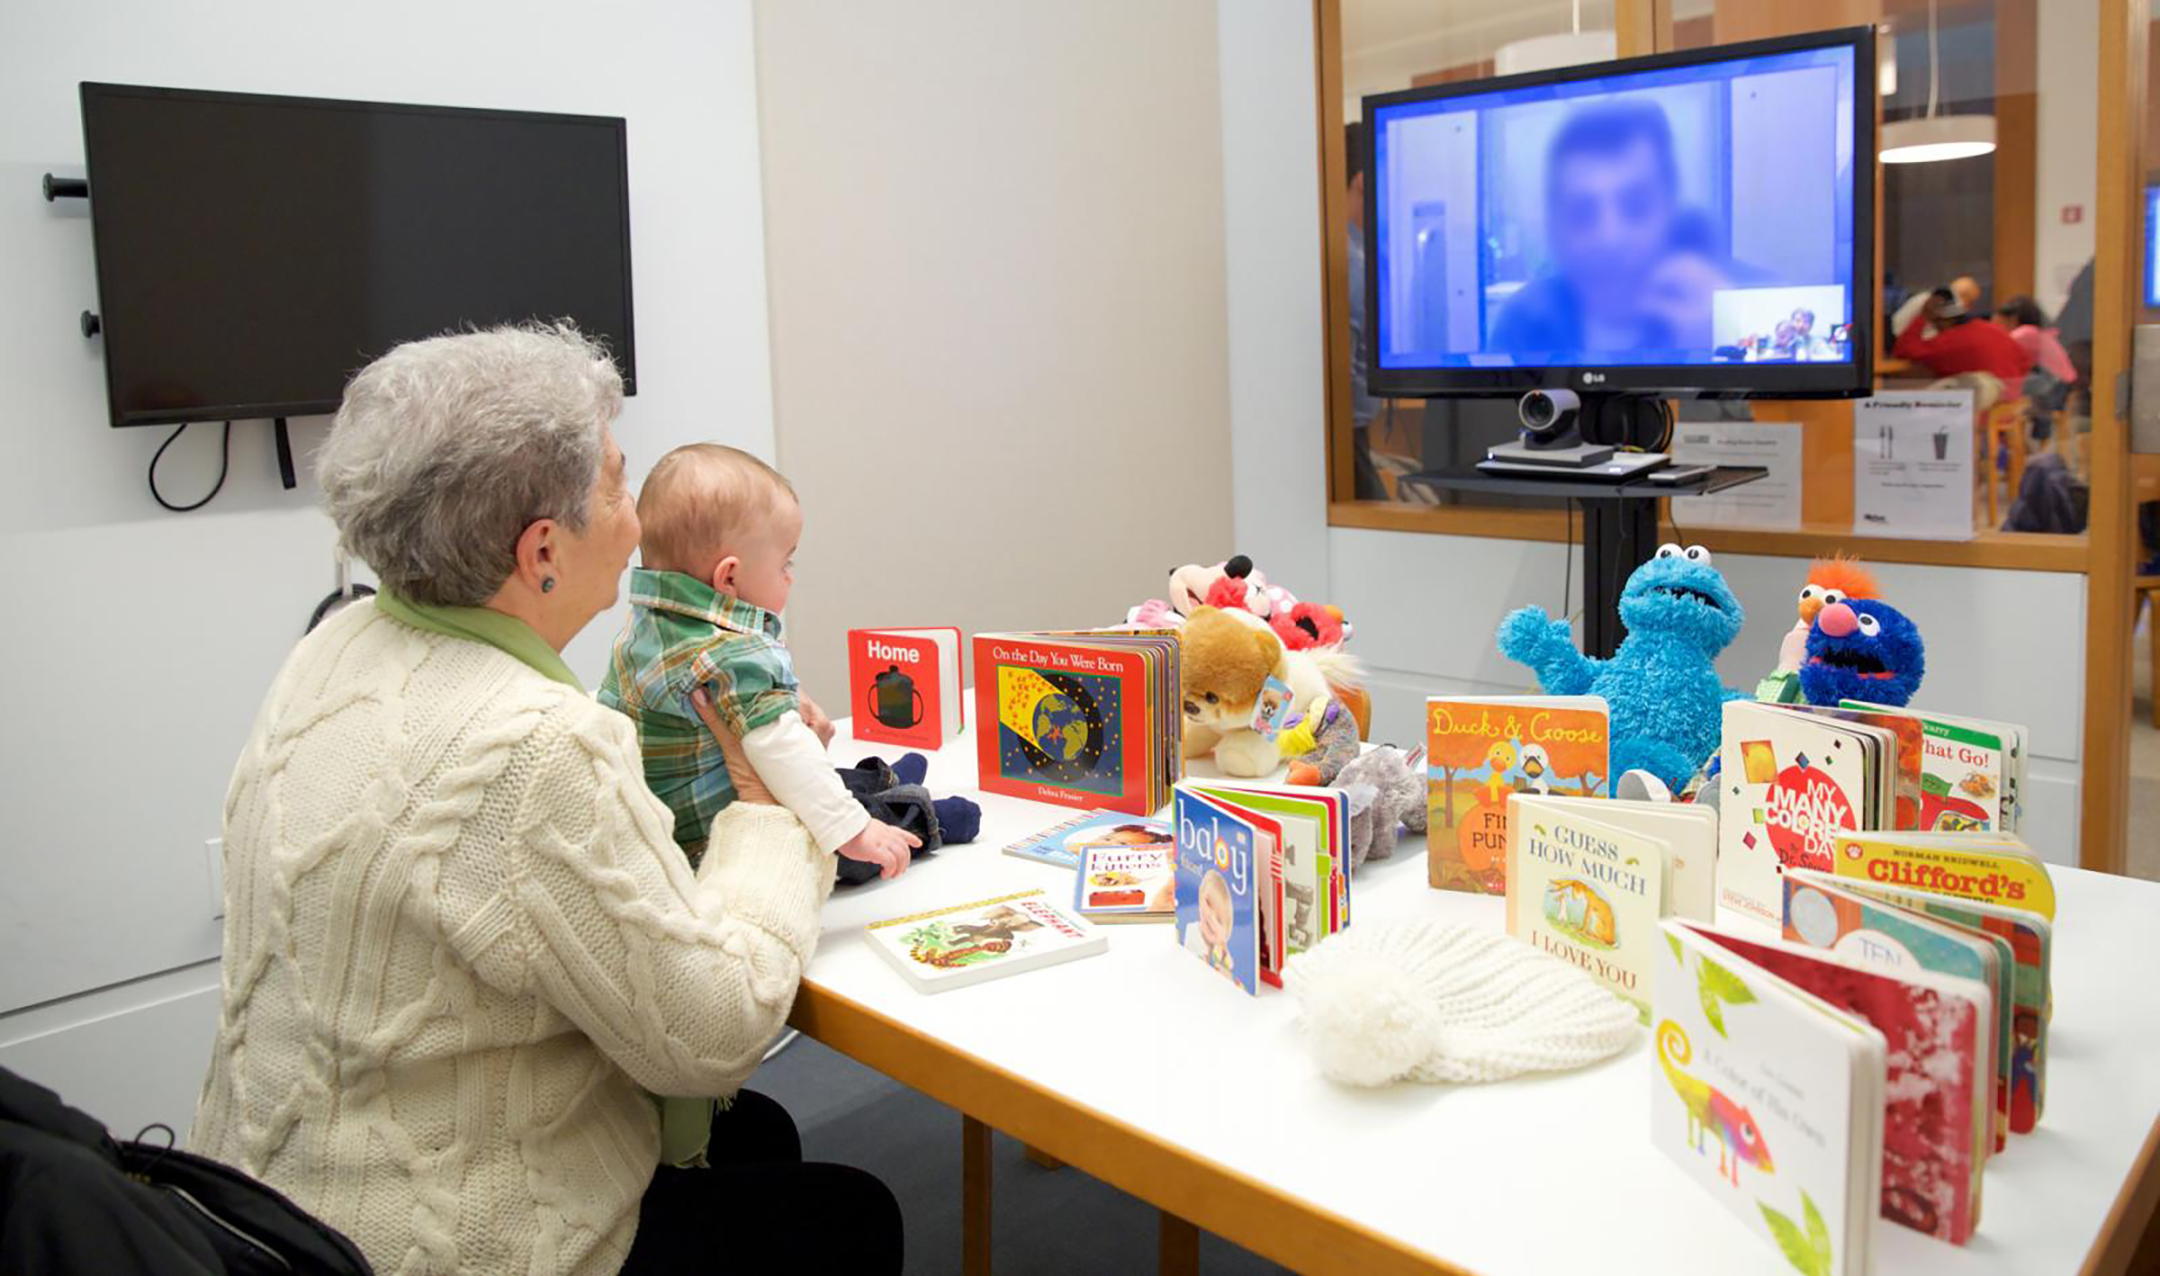 Elderly woman holding a small child sit at a table covered in toys and kids books while connecting with a male loved one, who's face is obscured, via a video screen